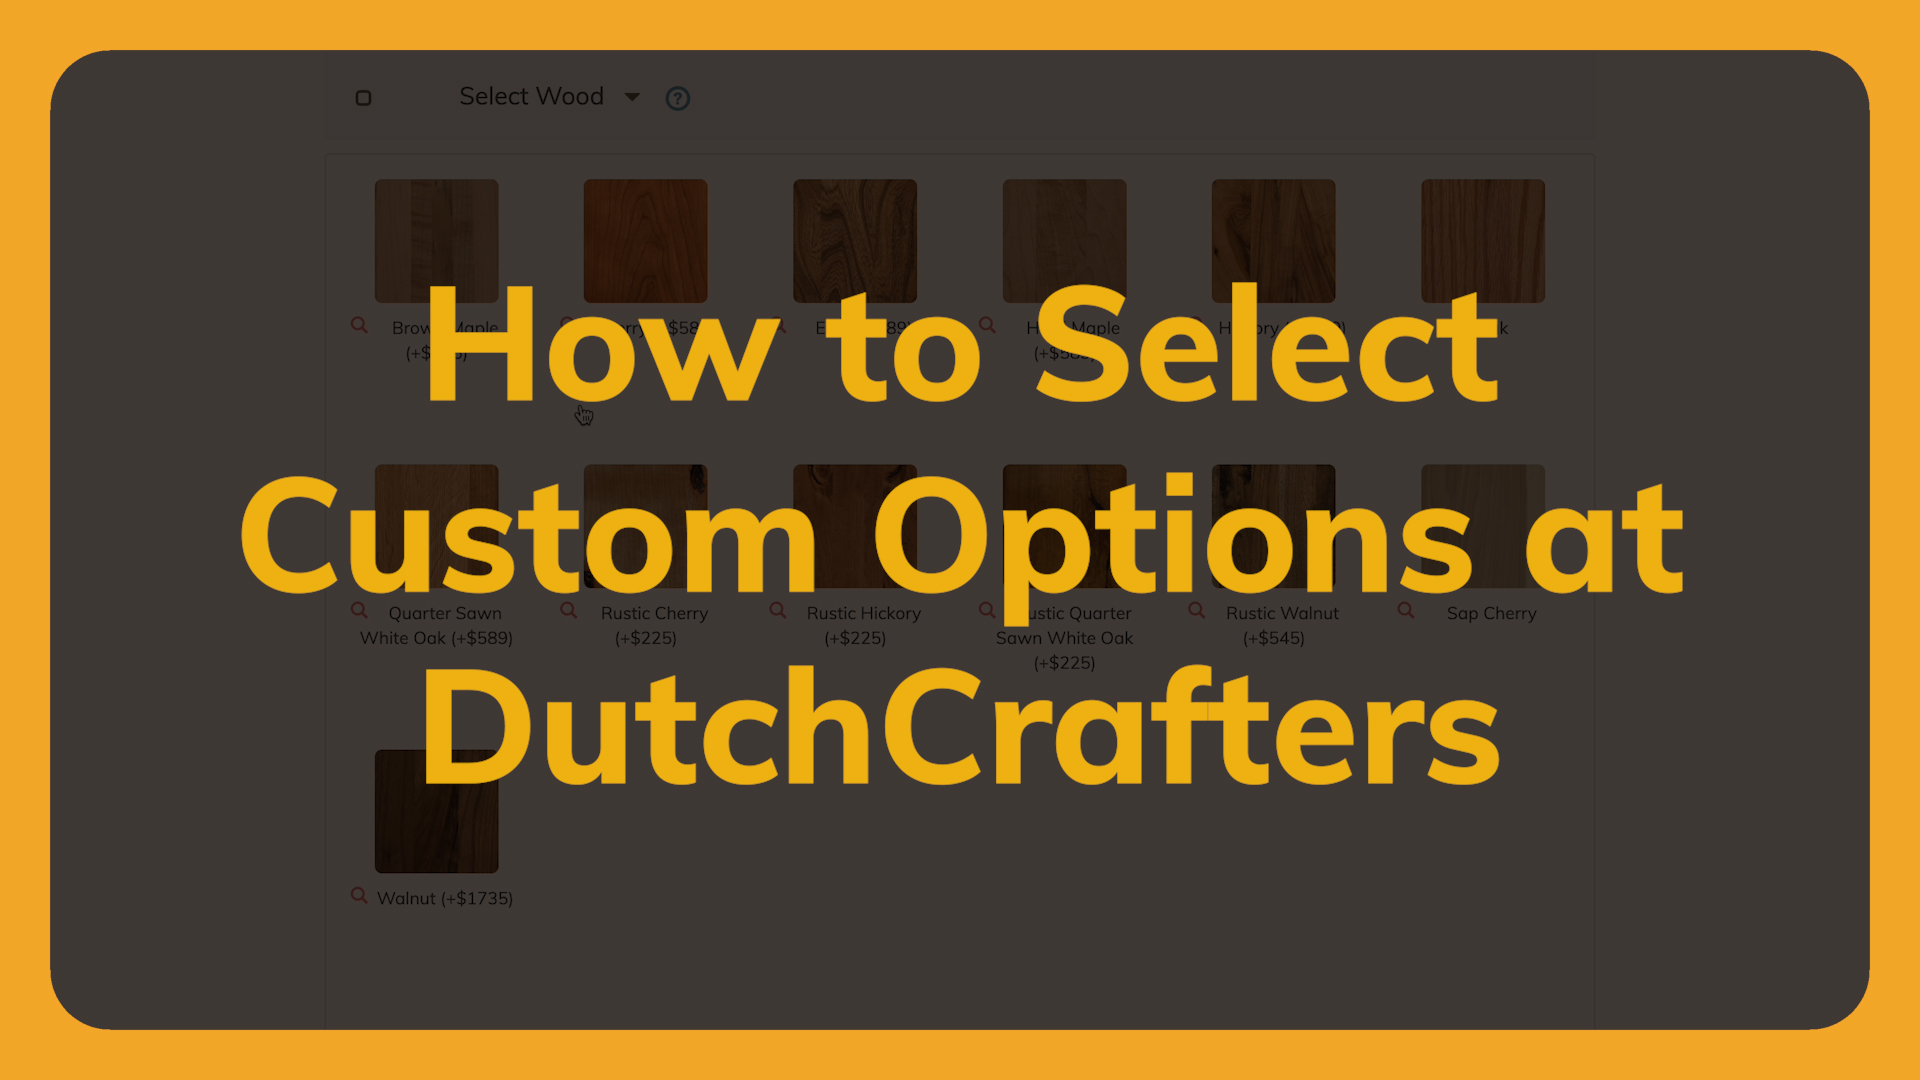 Video title reading, "How to Select Custom Furniture Options at DutchCrafters"